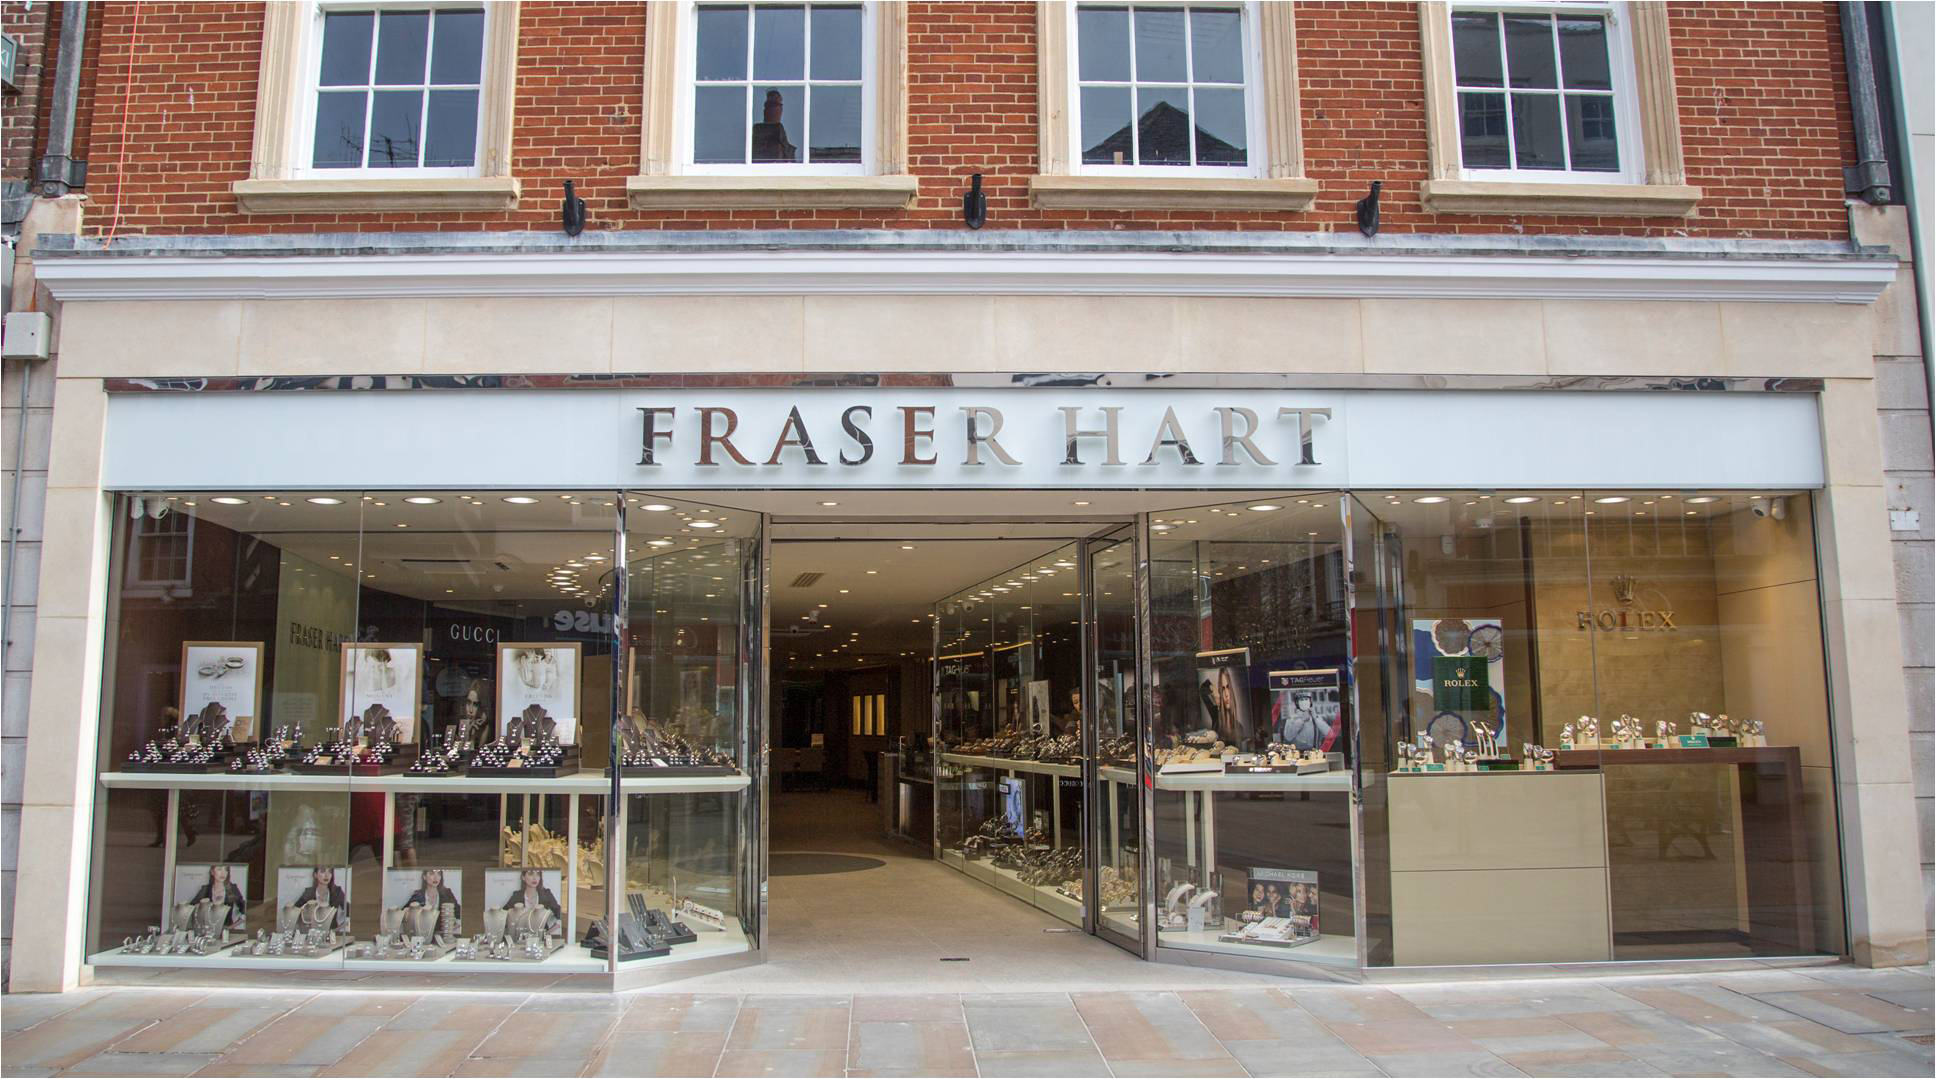 Fraser hart will continue to invest in high street stores in appropriate towns and cities.